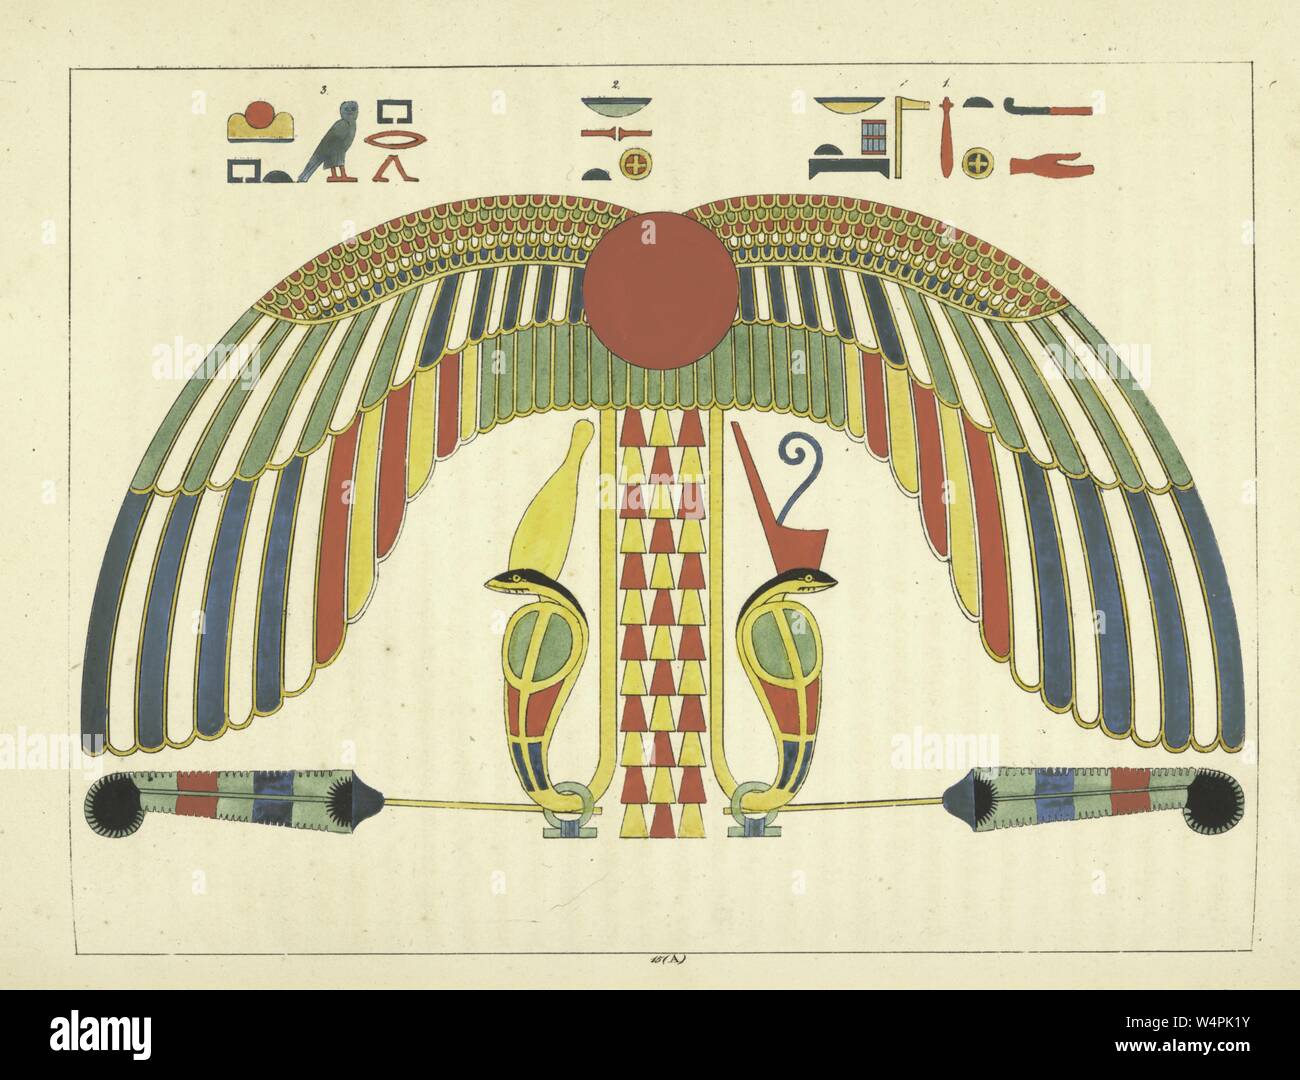 Ancient Egyptian living emblem of god Ra, the deity of the sun and the most important god in ancient Egyptian religion, illustration from the book 'Pantheon Egyptien' by Leon Jean Joseph Dubois, 1824. () Stock Photo